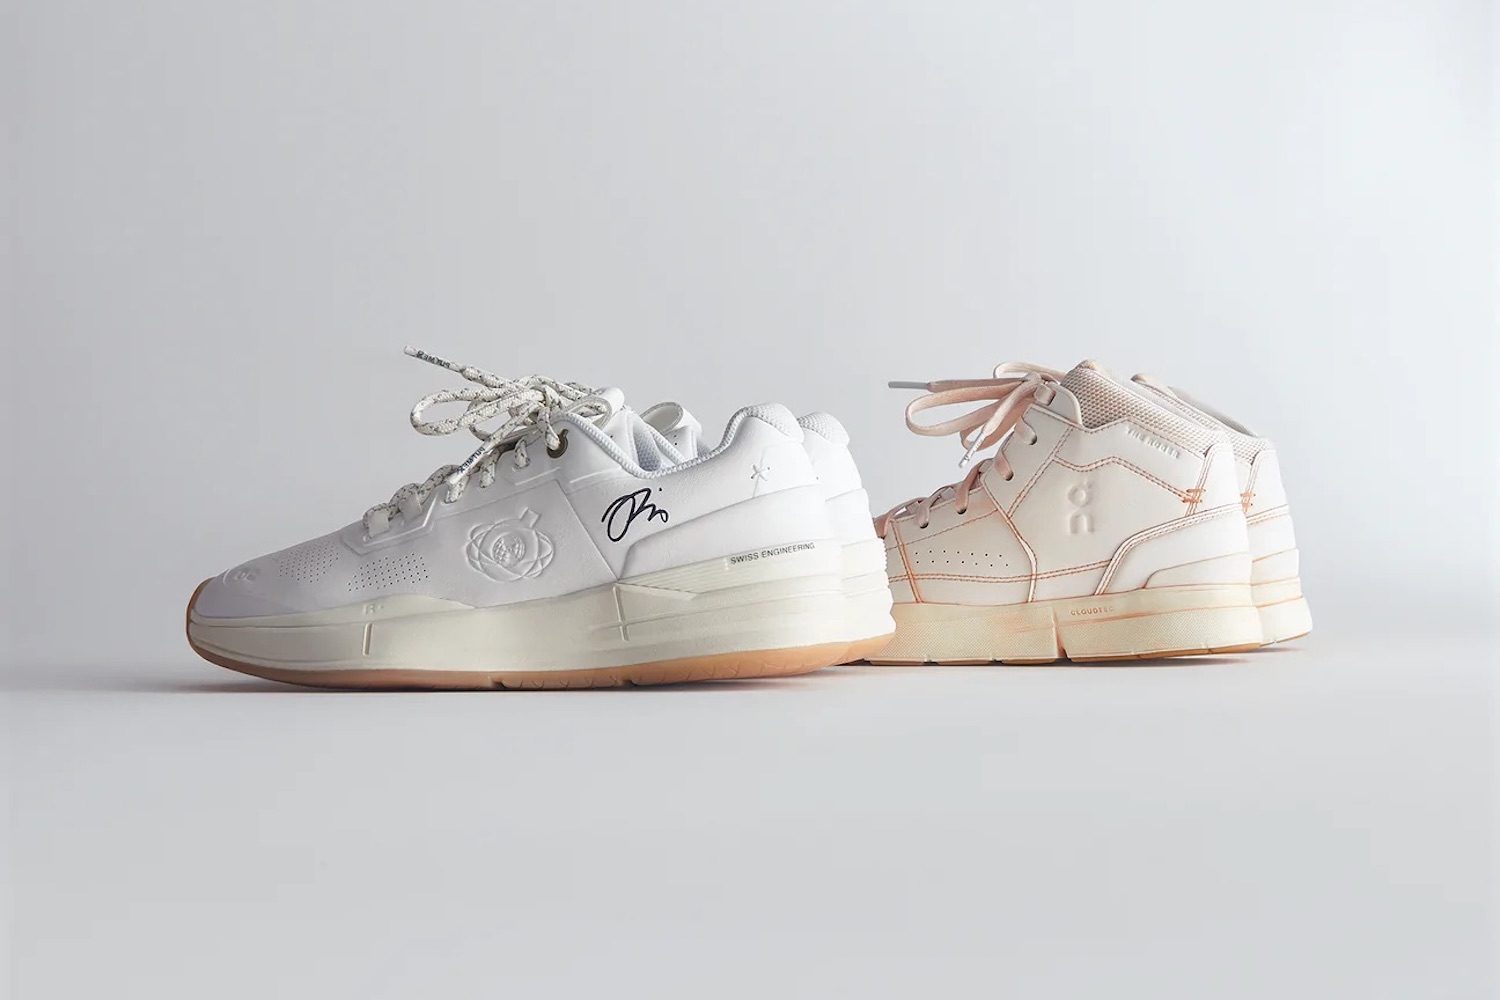 two pairs of shoes from the Kith x On Roger Federer collaboration on a white background